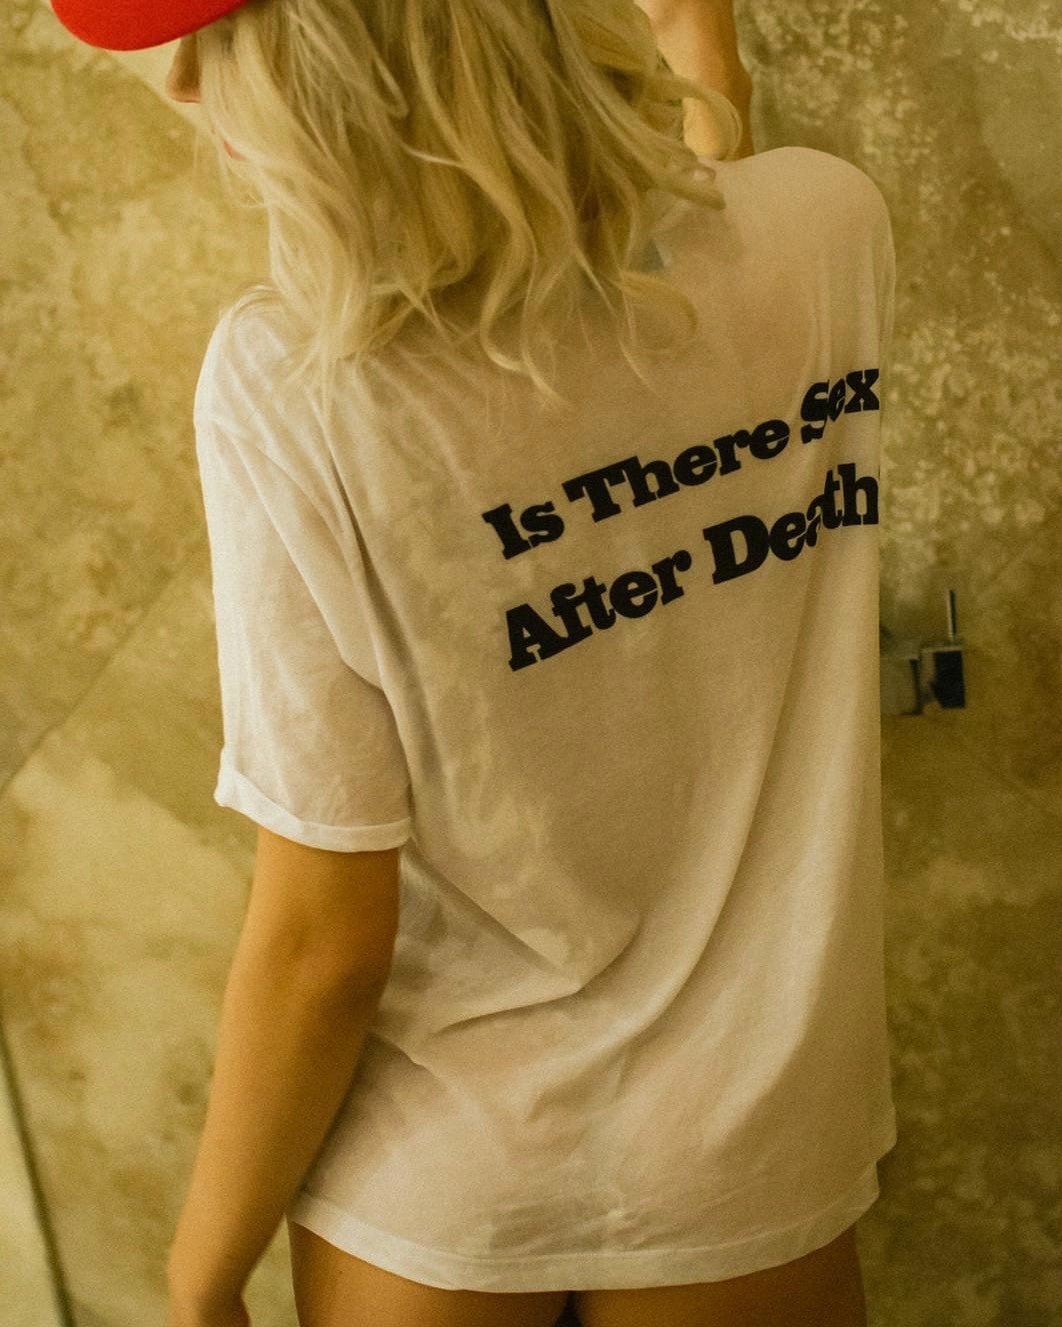 Photo by Masquenada with the username @Masquenada, posted on November 10, 2018 and the text says '?? what do you think? Follow @masquenada.ro for more horny T-shirts.'